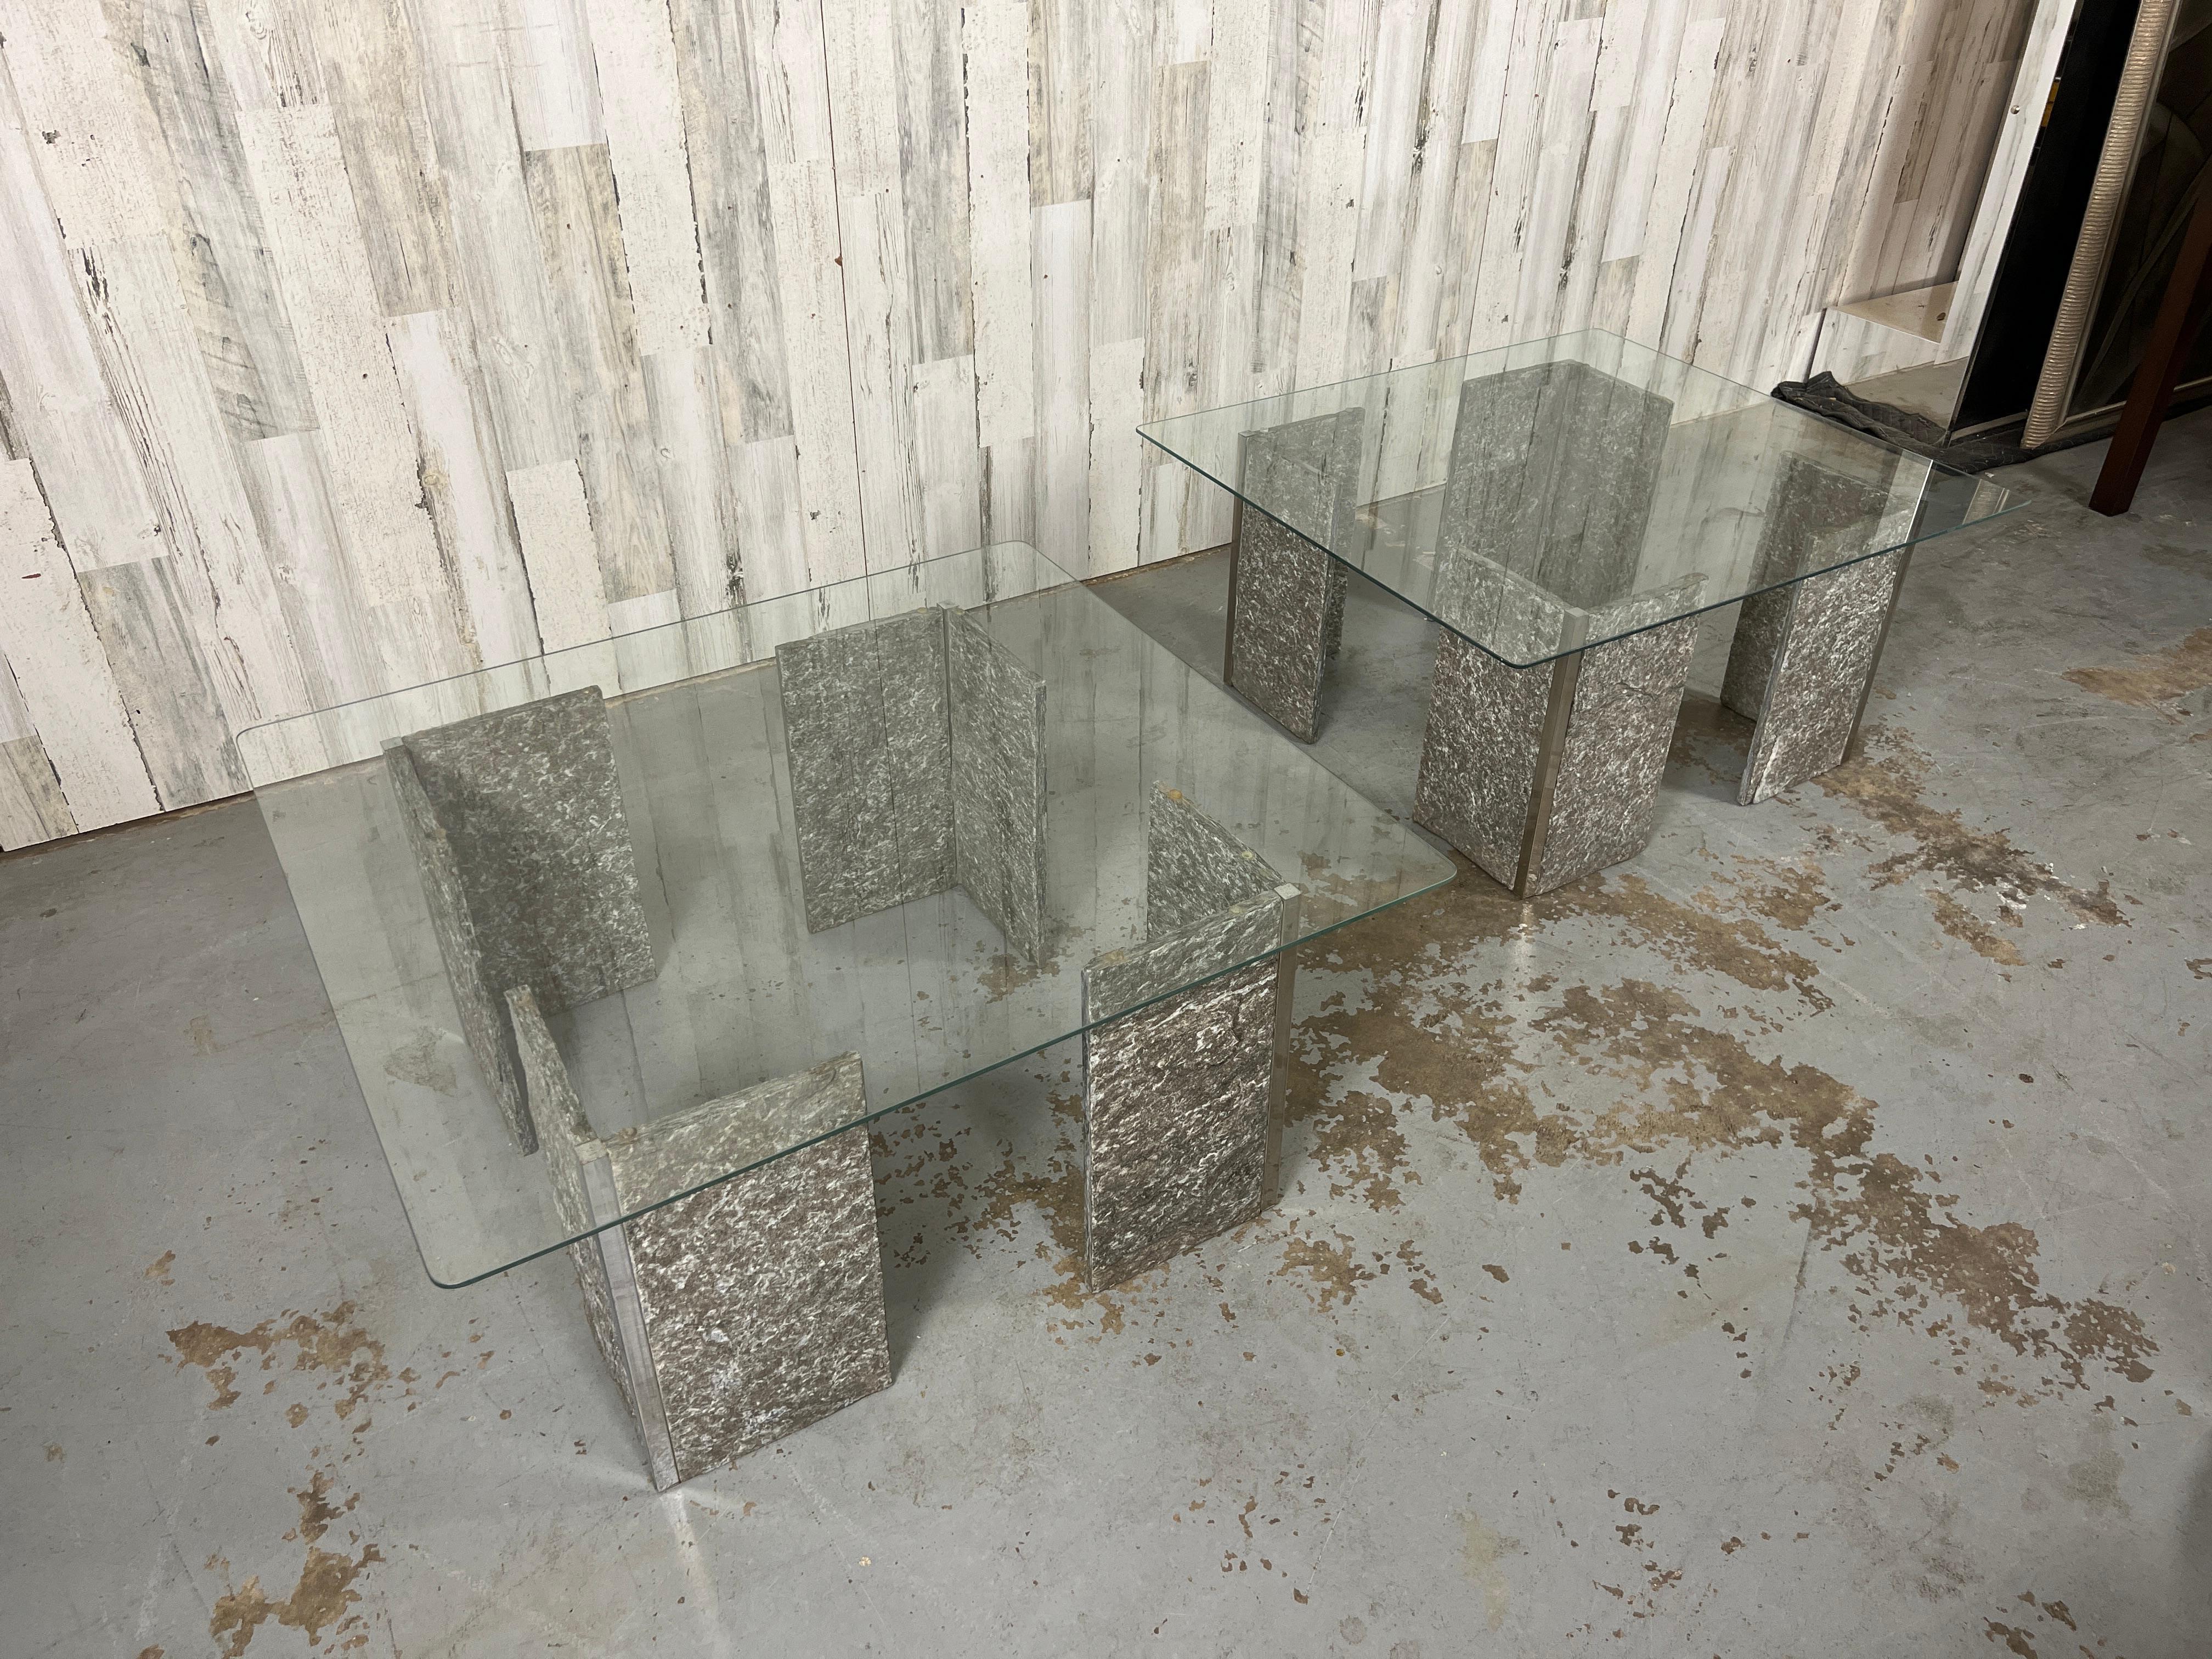 Chiseled granite conjoined with stainless steel corners and floating glass top end tables.
Each Leg is 8 3/4 Wide and deep. 15 3/4 high
Glass is 31 3/4 x 36
Glass is optional.